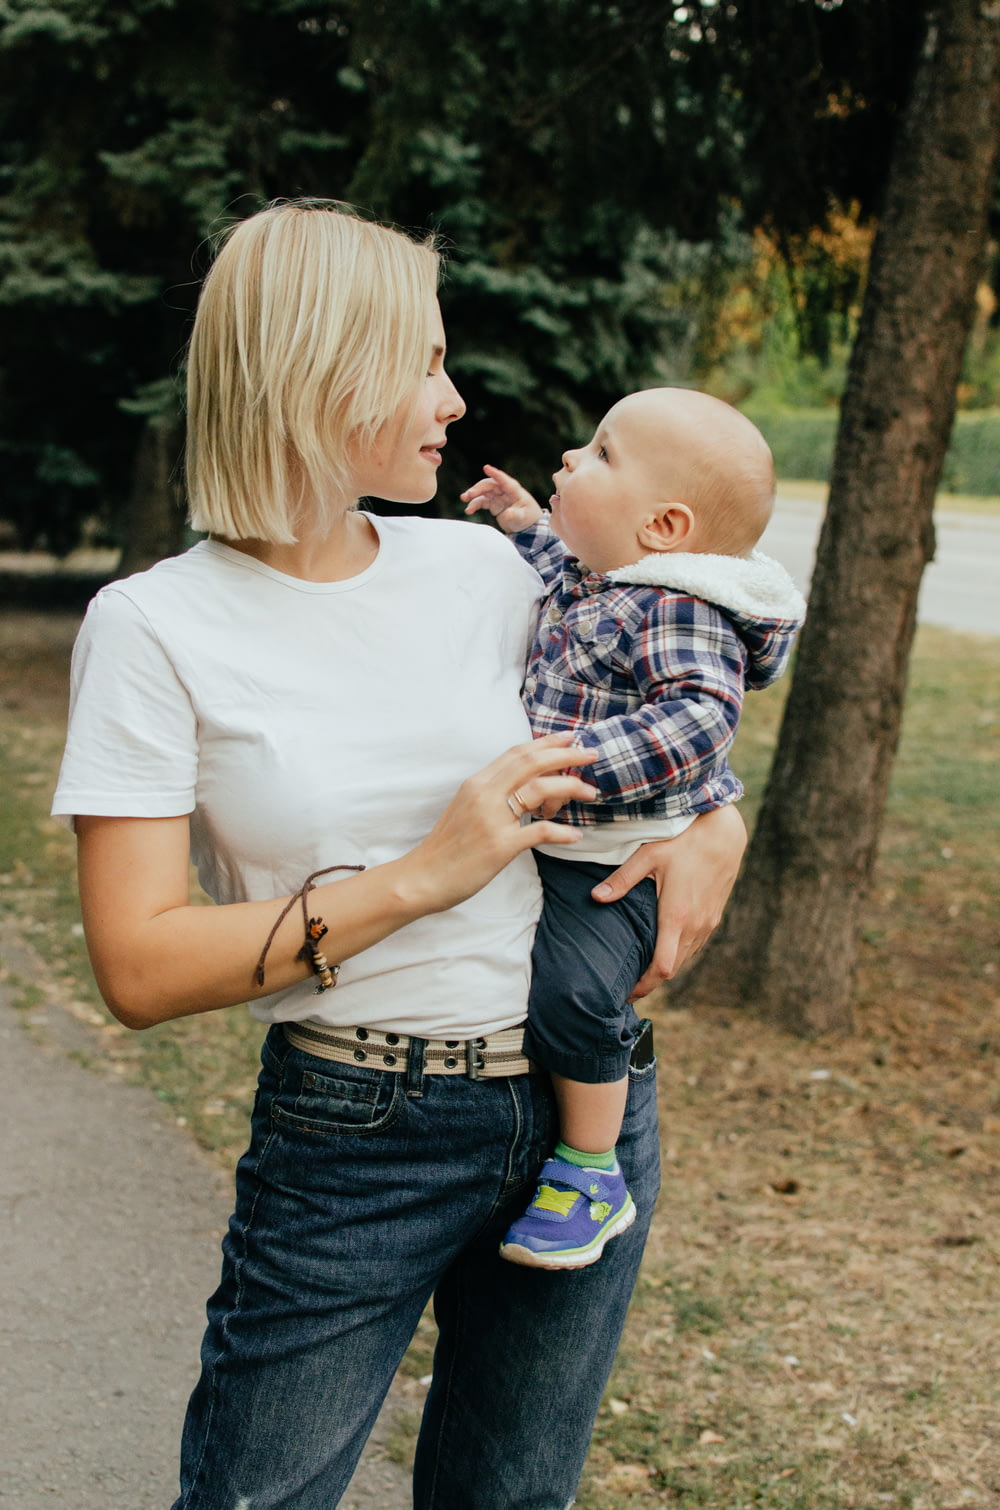 woman in white shirt carrying baby in blue and white plaid shirt